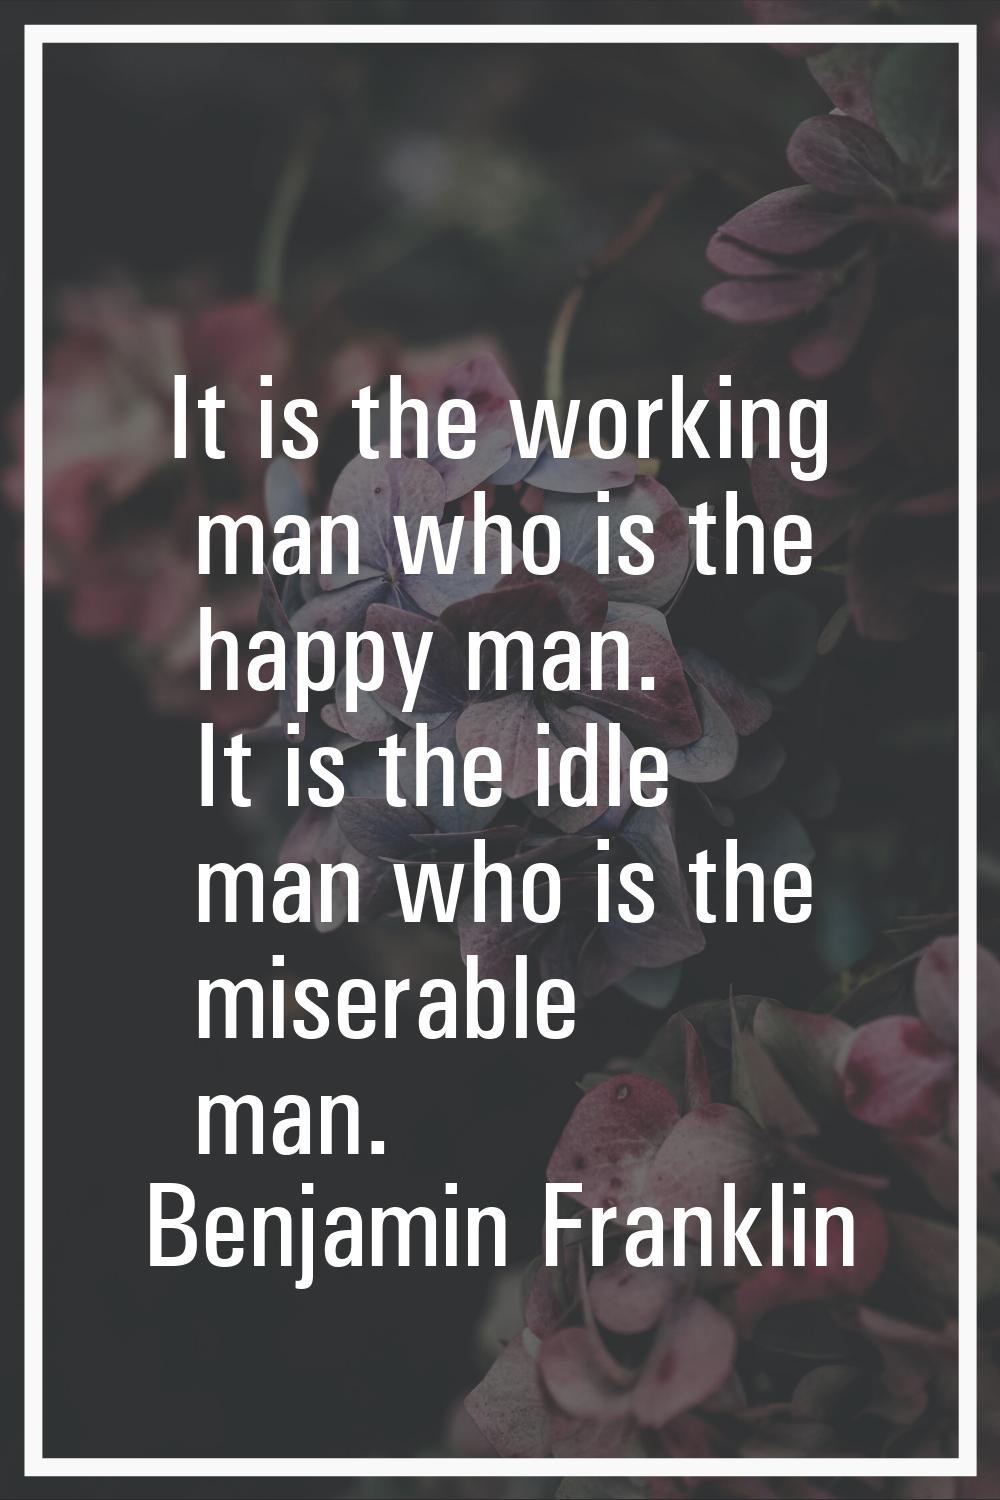 It is the working man who is the happy man. It is the idle man who is the miserable man.